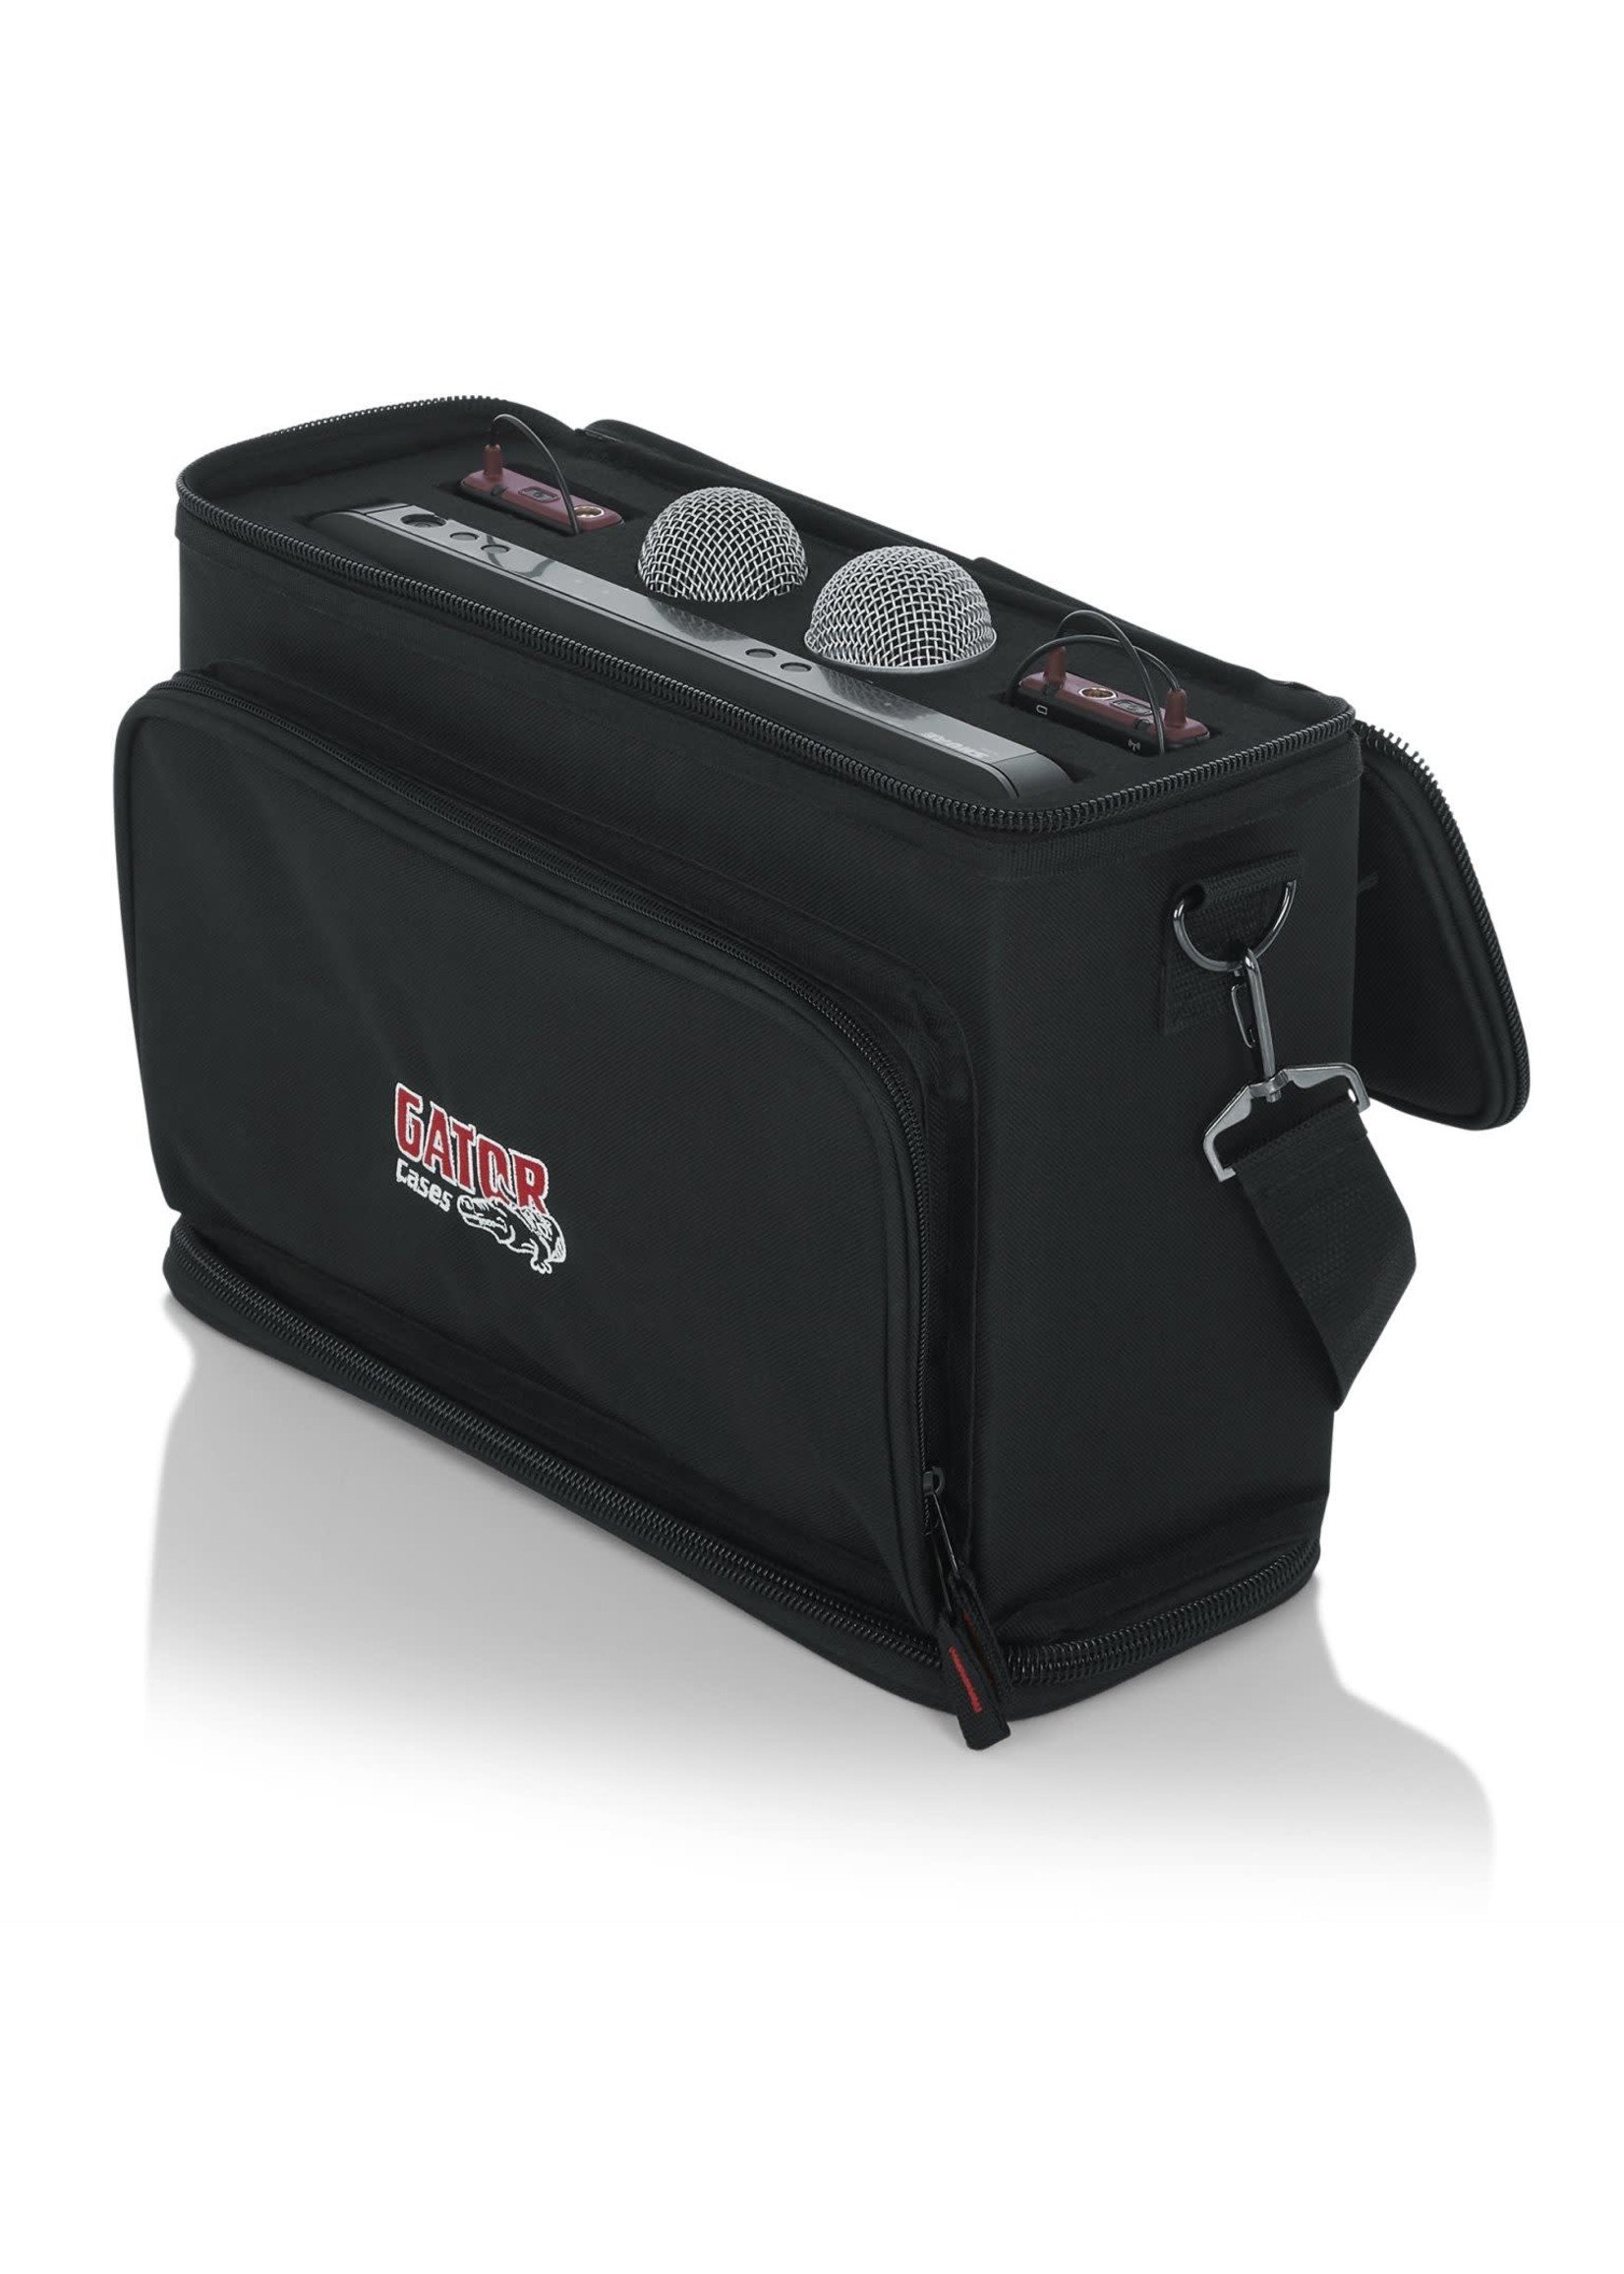 Gator Gator GM-DUALW Shure BLX Style Wireless Carry Bag holds Two Microphones & Two Bodypacks